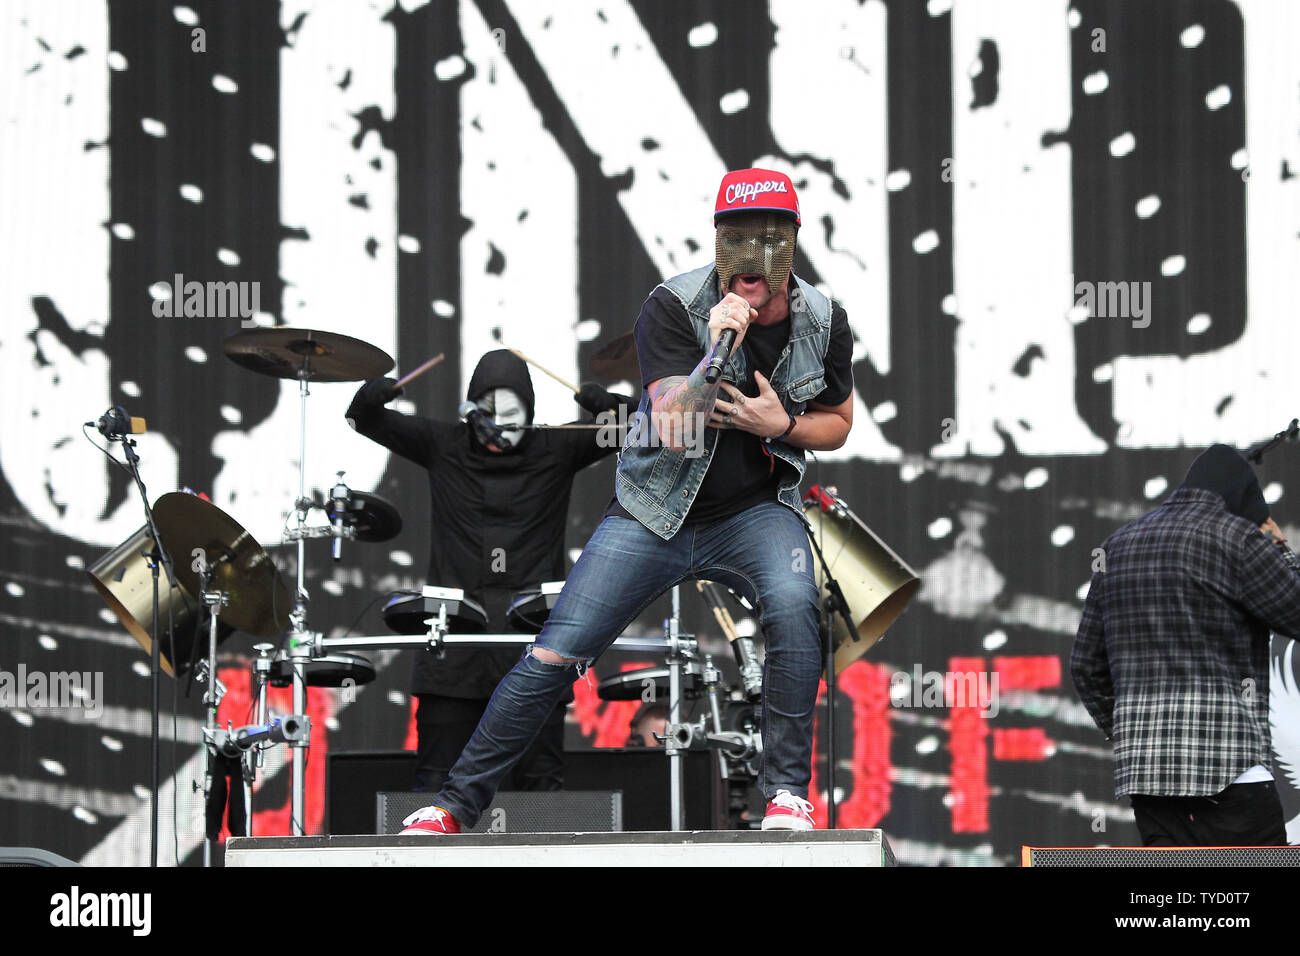 American rock band Hollywood Undead performs during the 30th bi-annual Rock  in Rio music festival